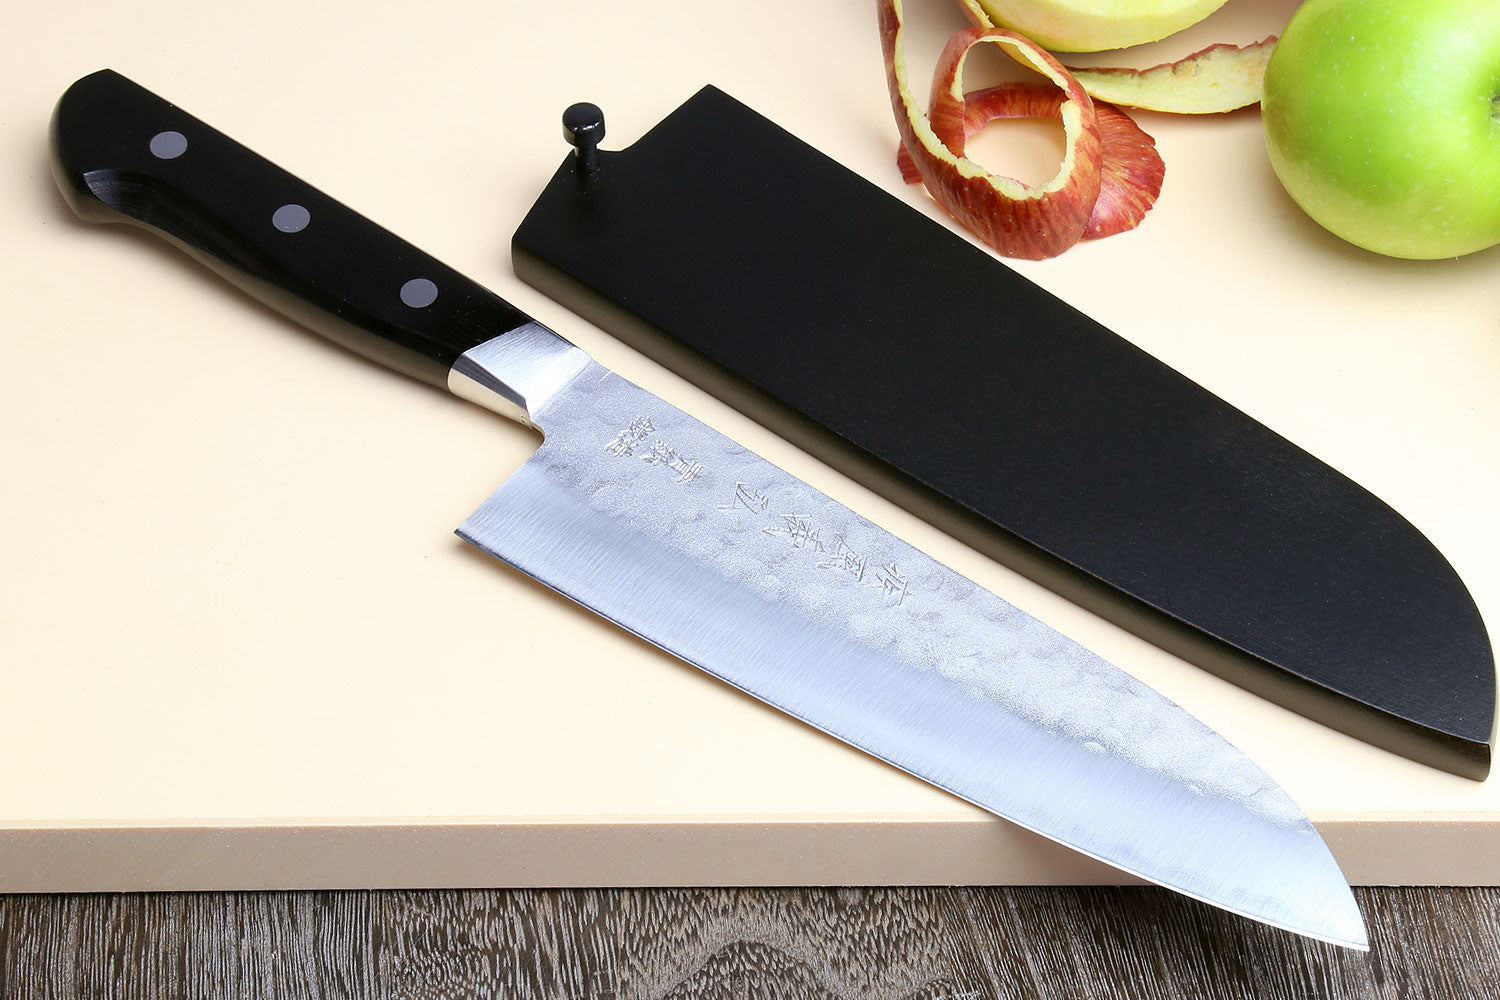 OEM Santoku Knife 7-inch Japanese Chef Knife High Carbon Stainless